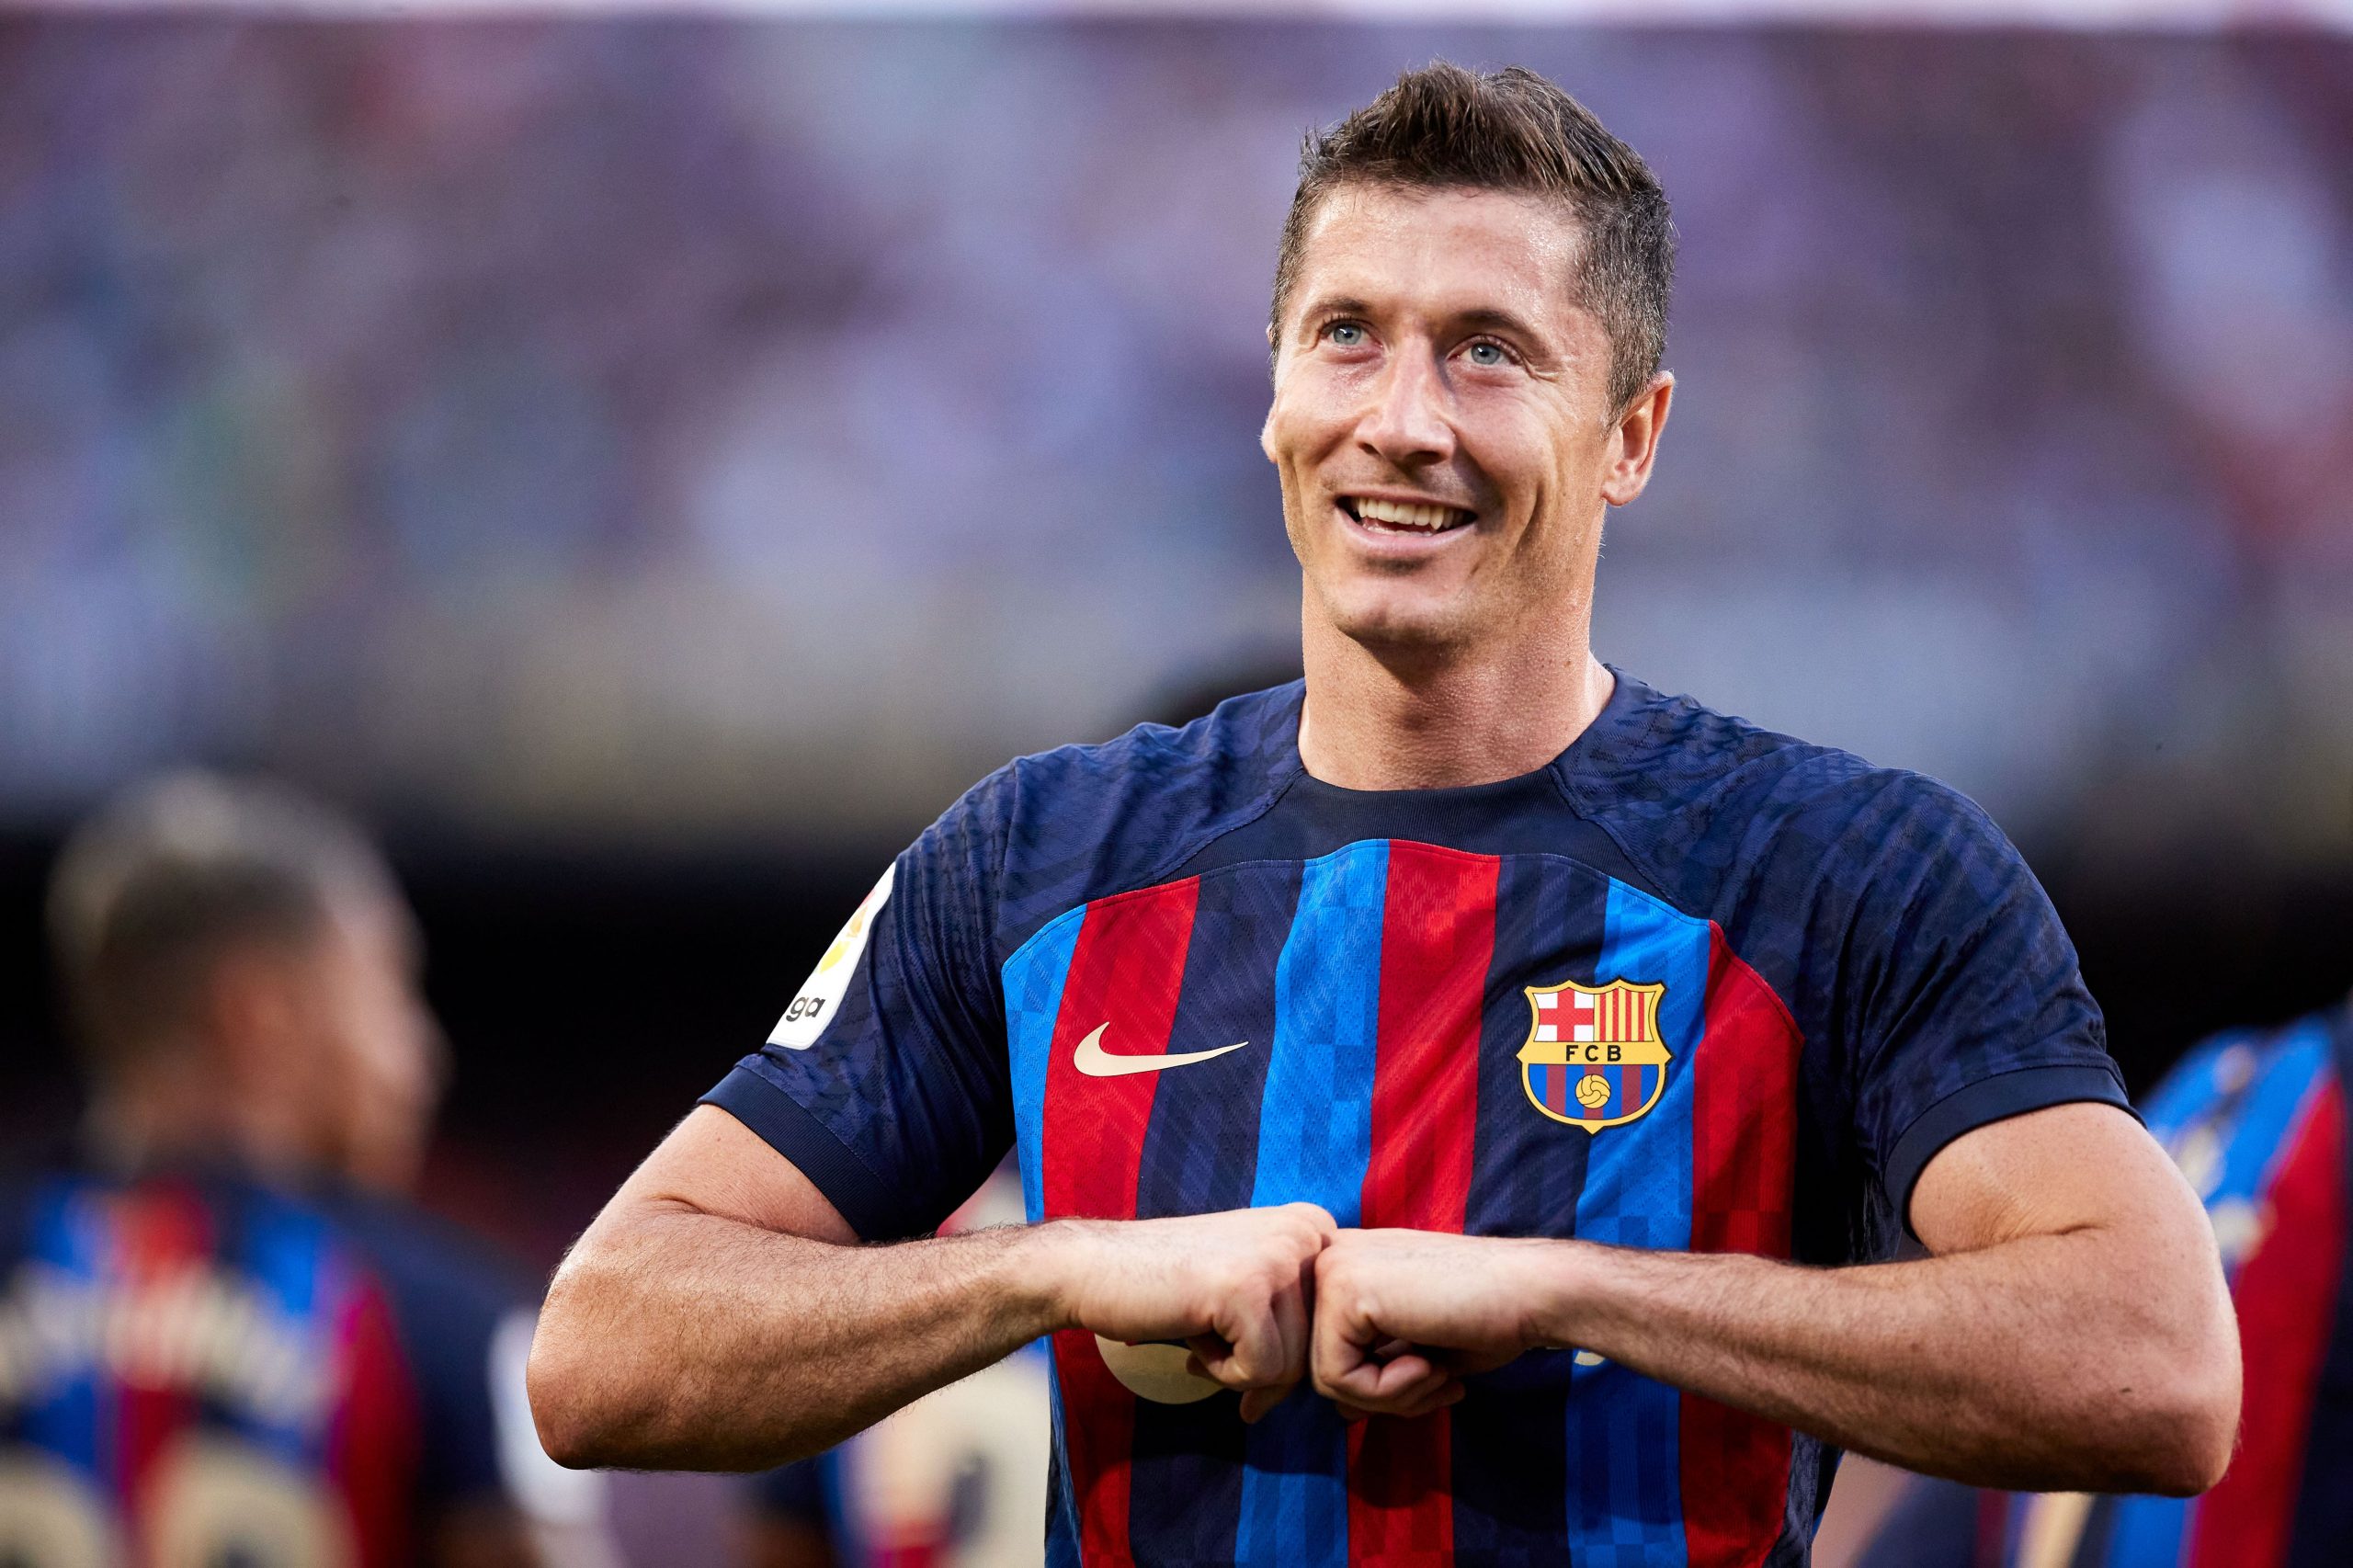 Champions League soccer predictions and UCL best bets for Tuesday 9/13: Barcelona to test Bayern Munich